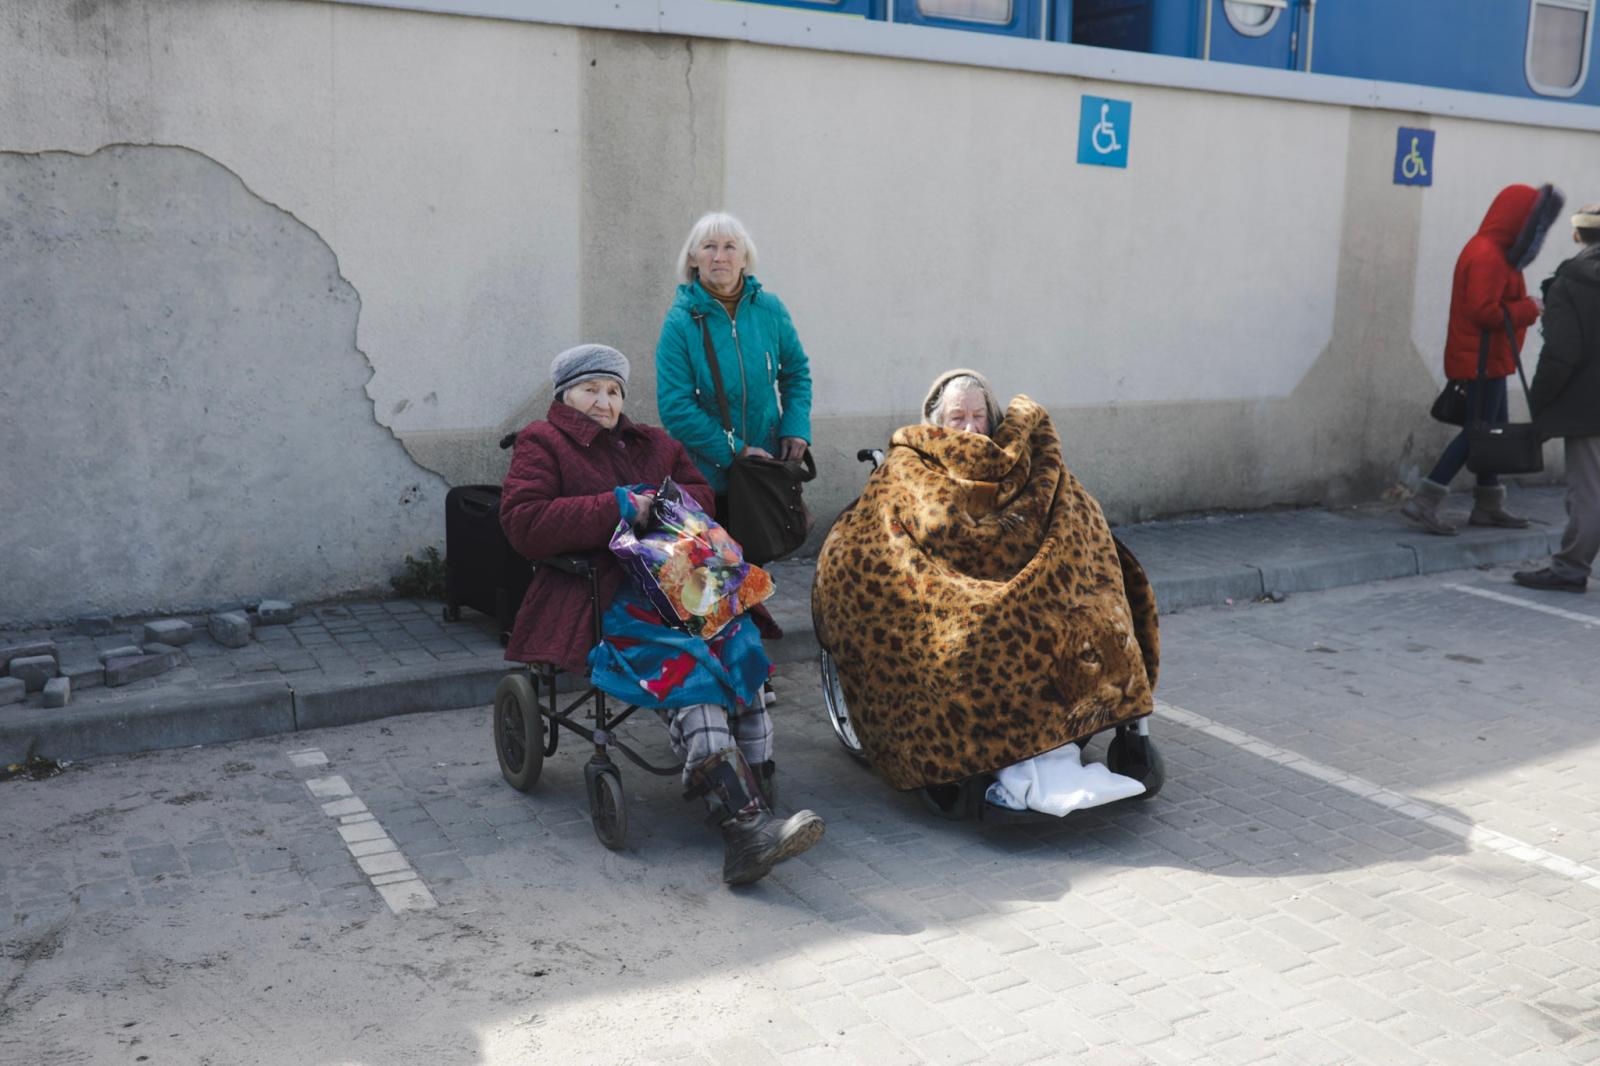 Anadolu/Getty - Civilians seek shelters after Russian missile strikes on Lviv - Abril 18, 2022. Lviv, Ukraine. After the first explosions...